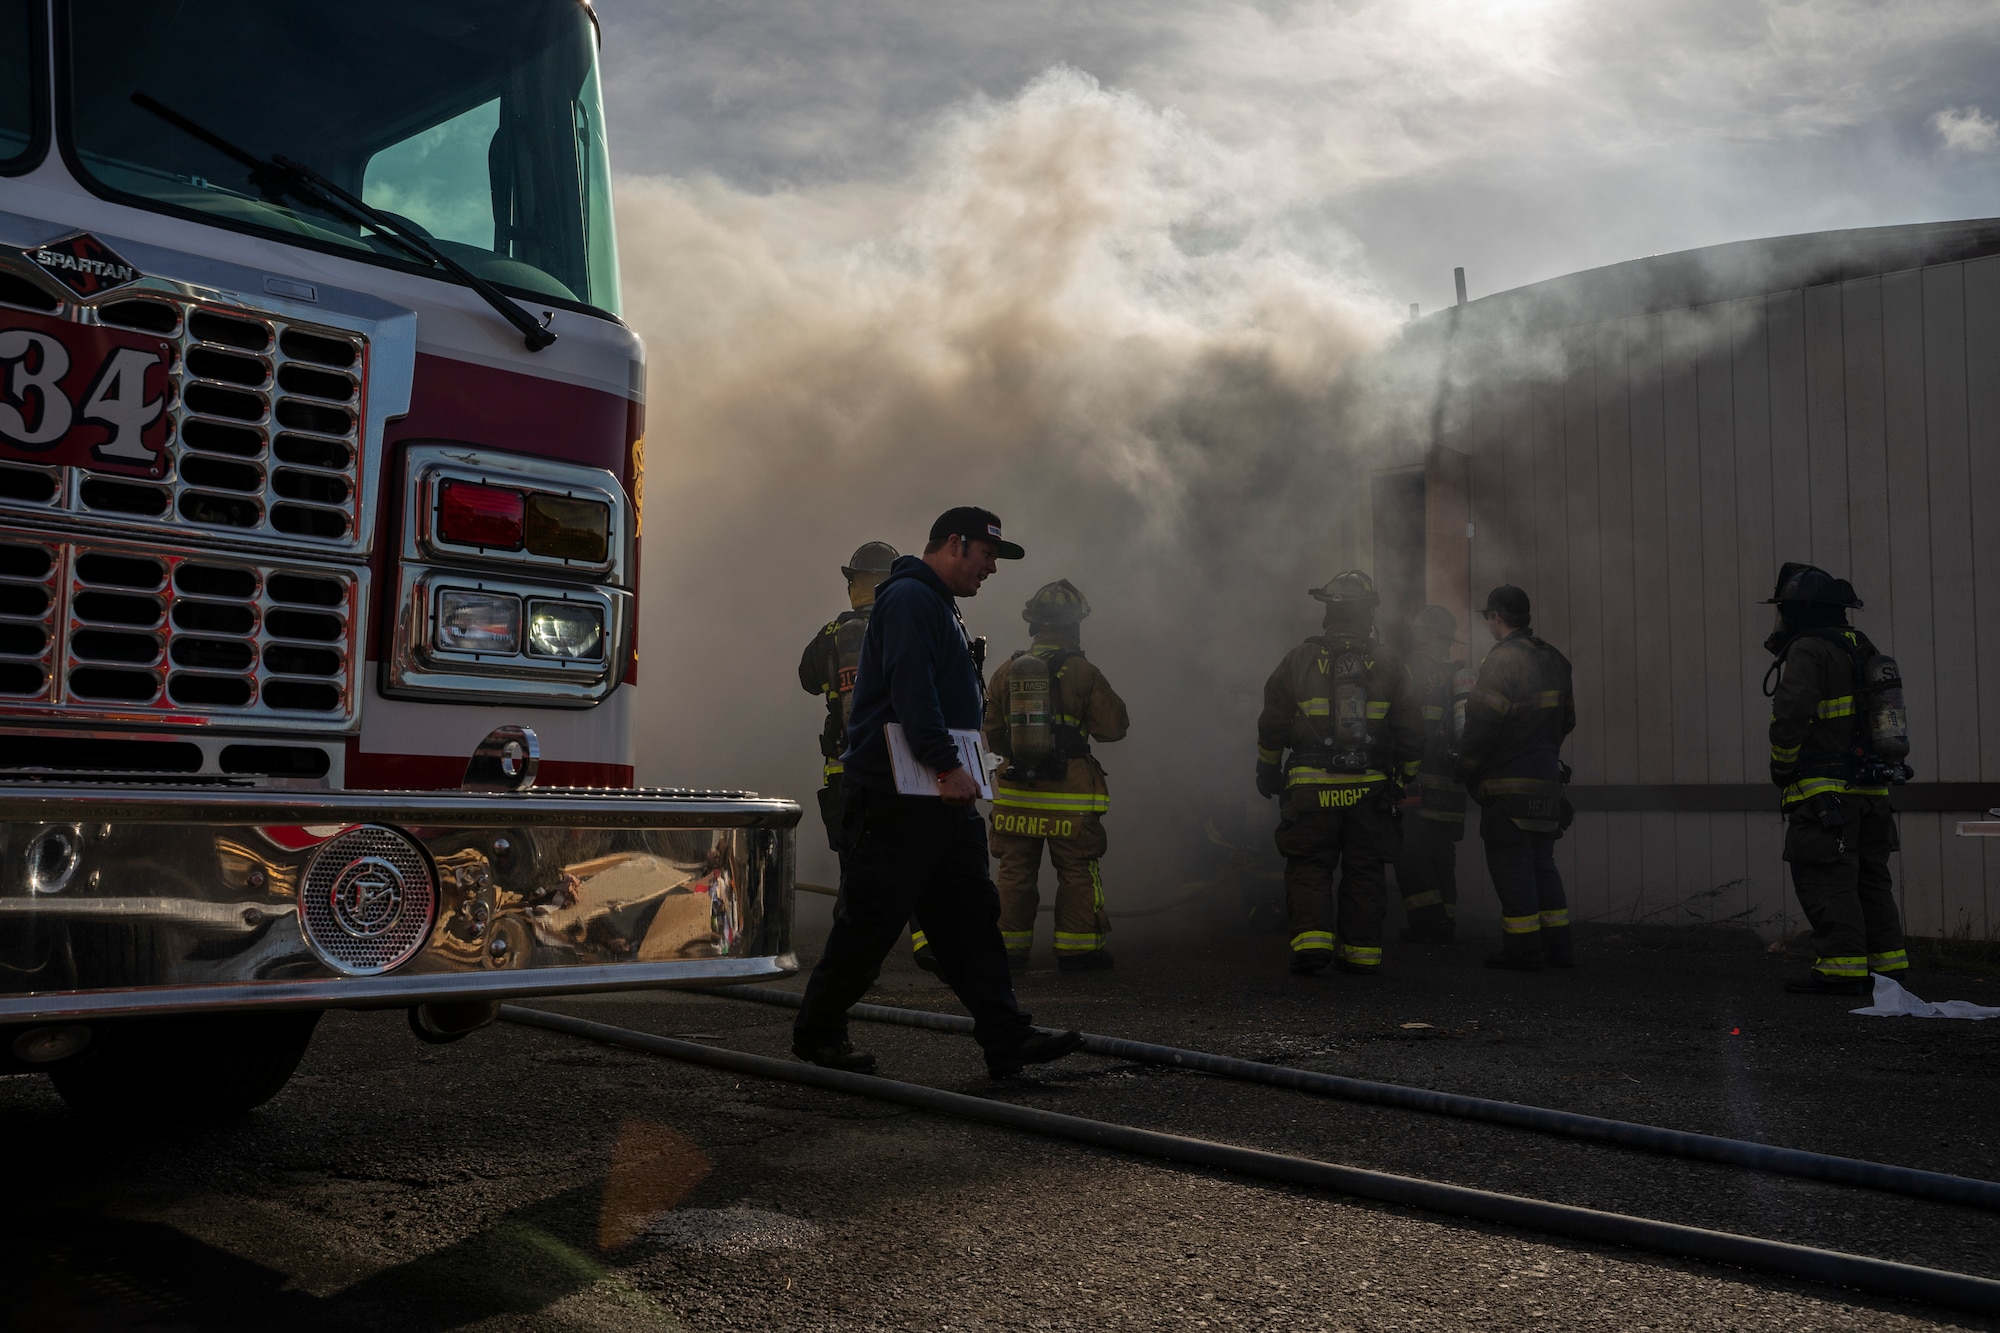 Firefighters from various local fire emergency services participate in a live burn training at Travis Air Force Base, California, Jan. 14, 2020. Travis Fire Emergency services and 10 other fire departments used four buildings at Travis AFB for live-fire training before conducting a final controlled burn to remove them. (Courtesy photo)